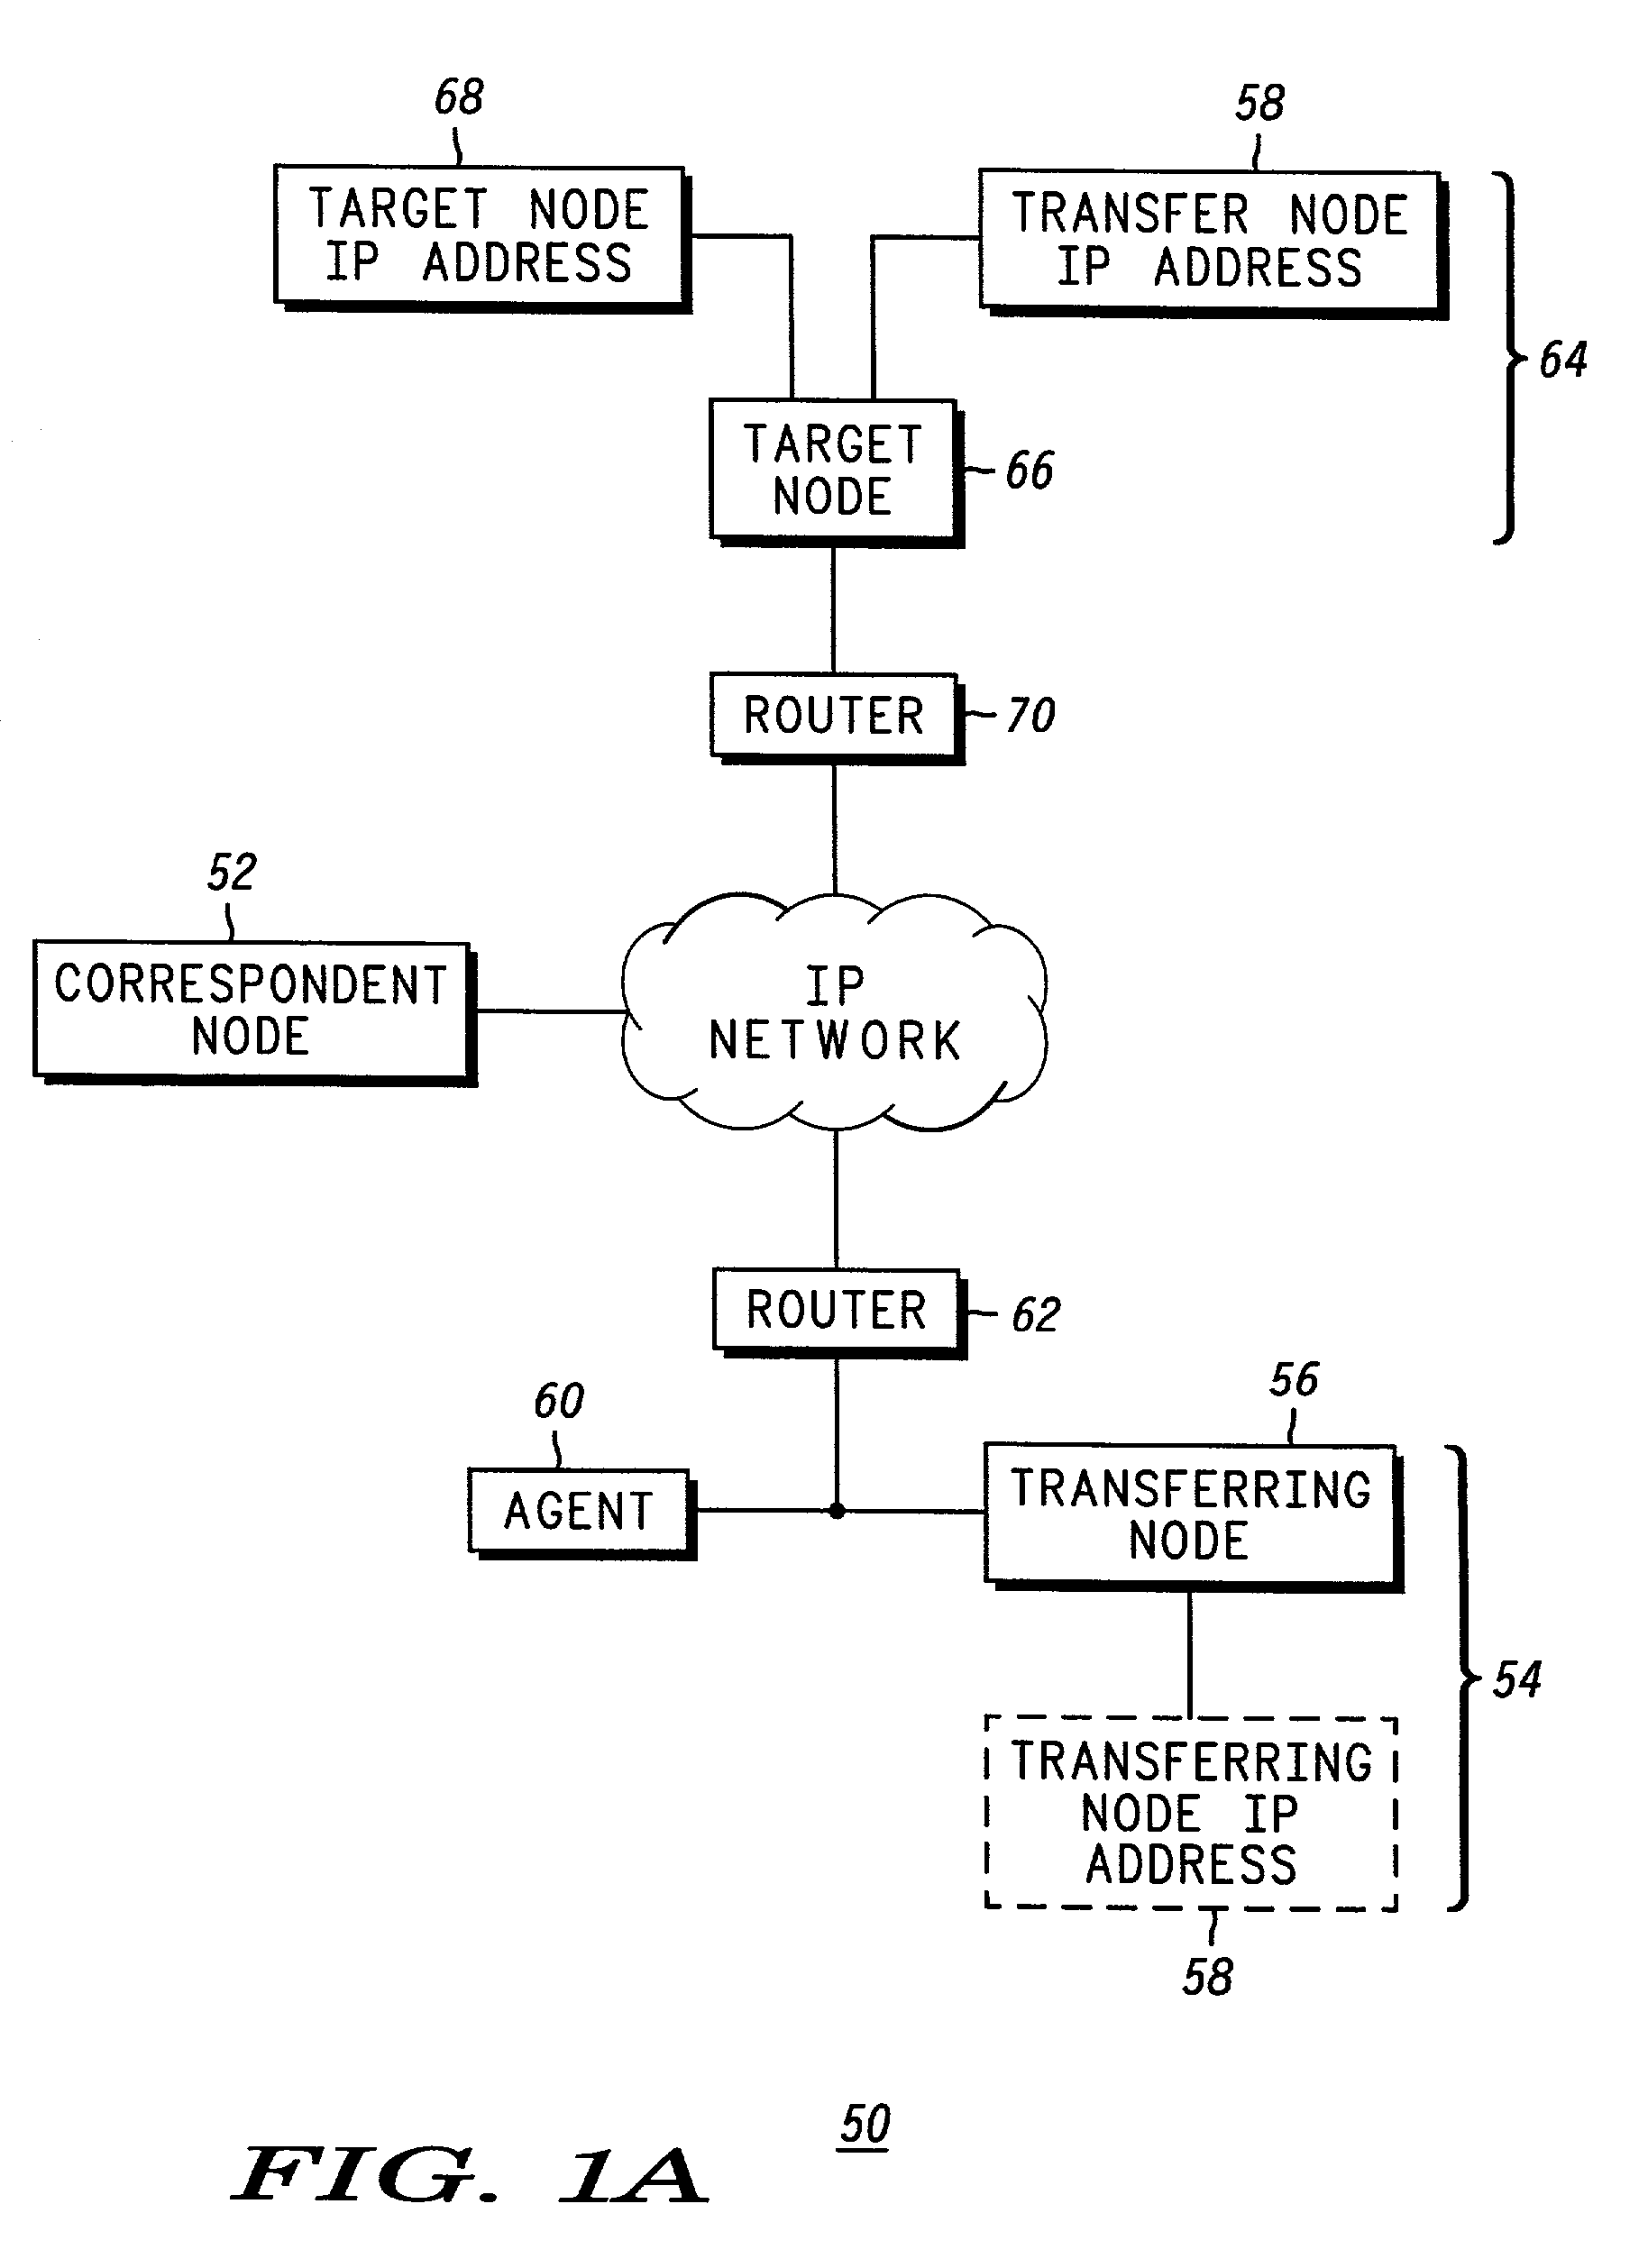 Method and apparatus for transferring a communication session